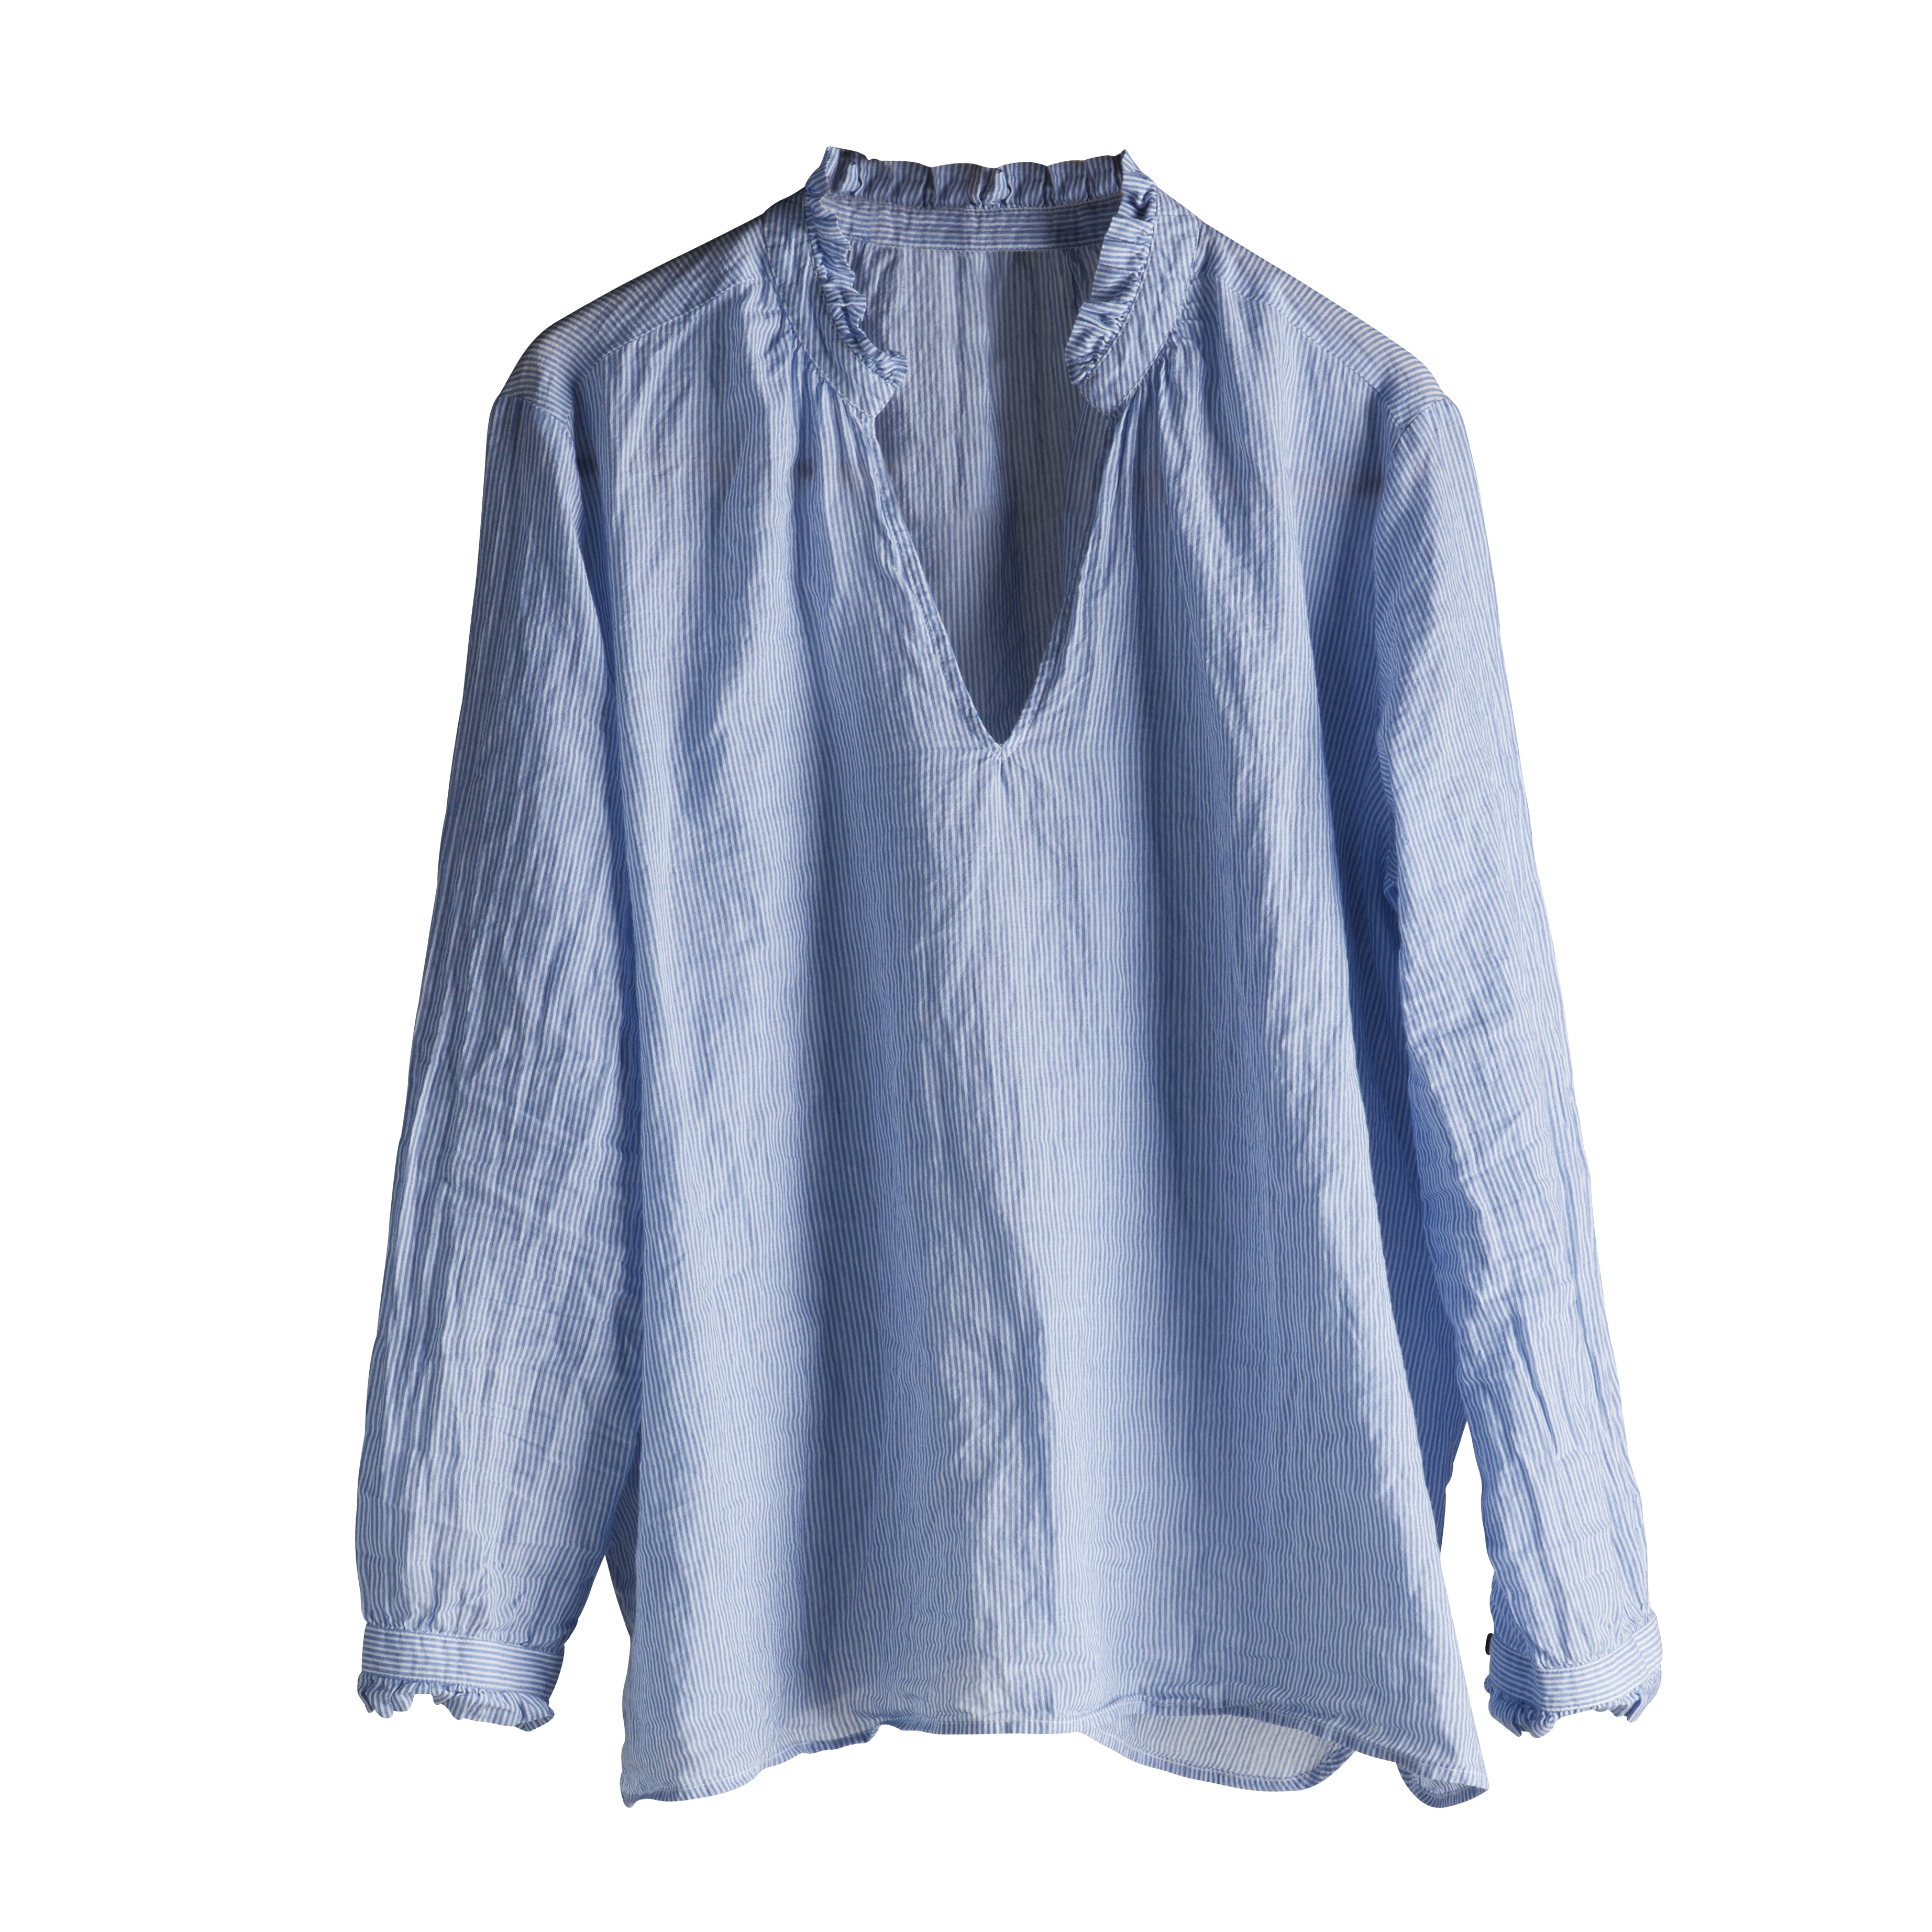 Light shirt with standing collar and ruffle detail, baby blu | Products ...